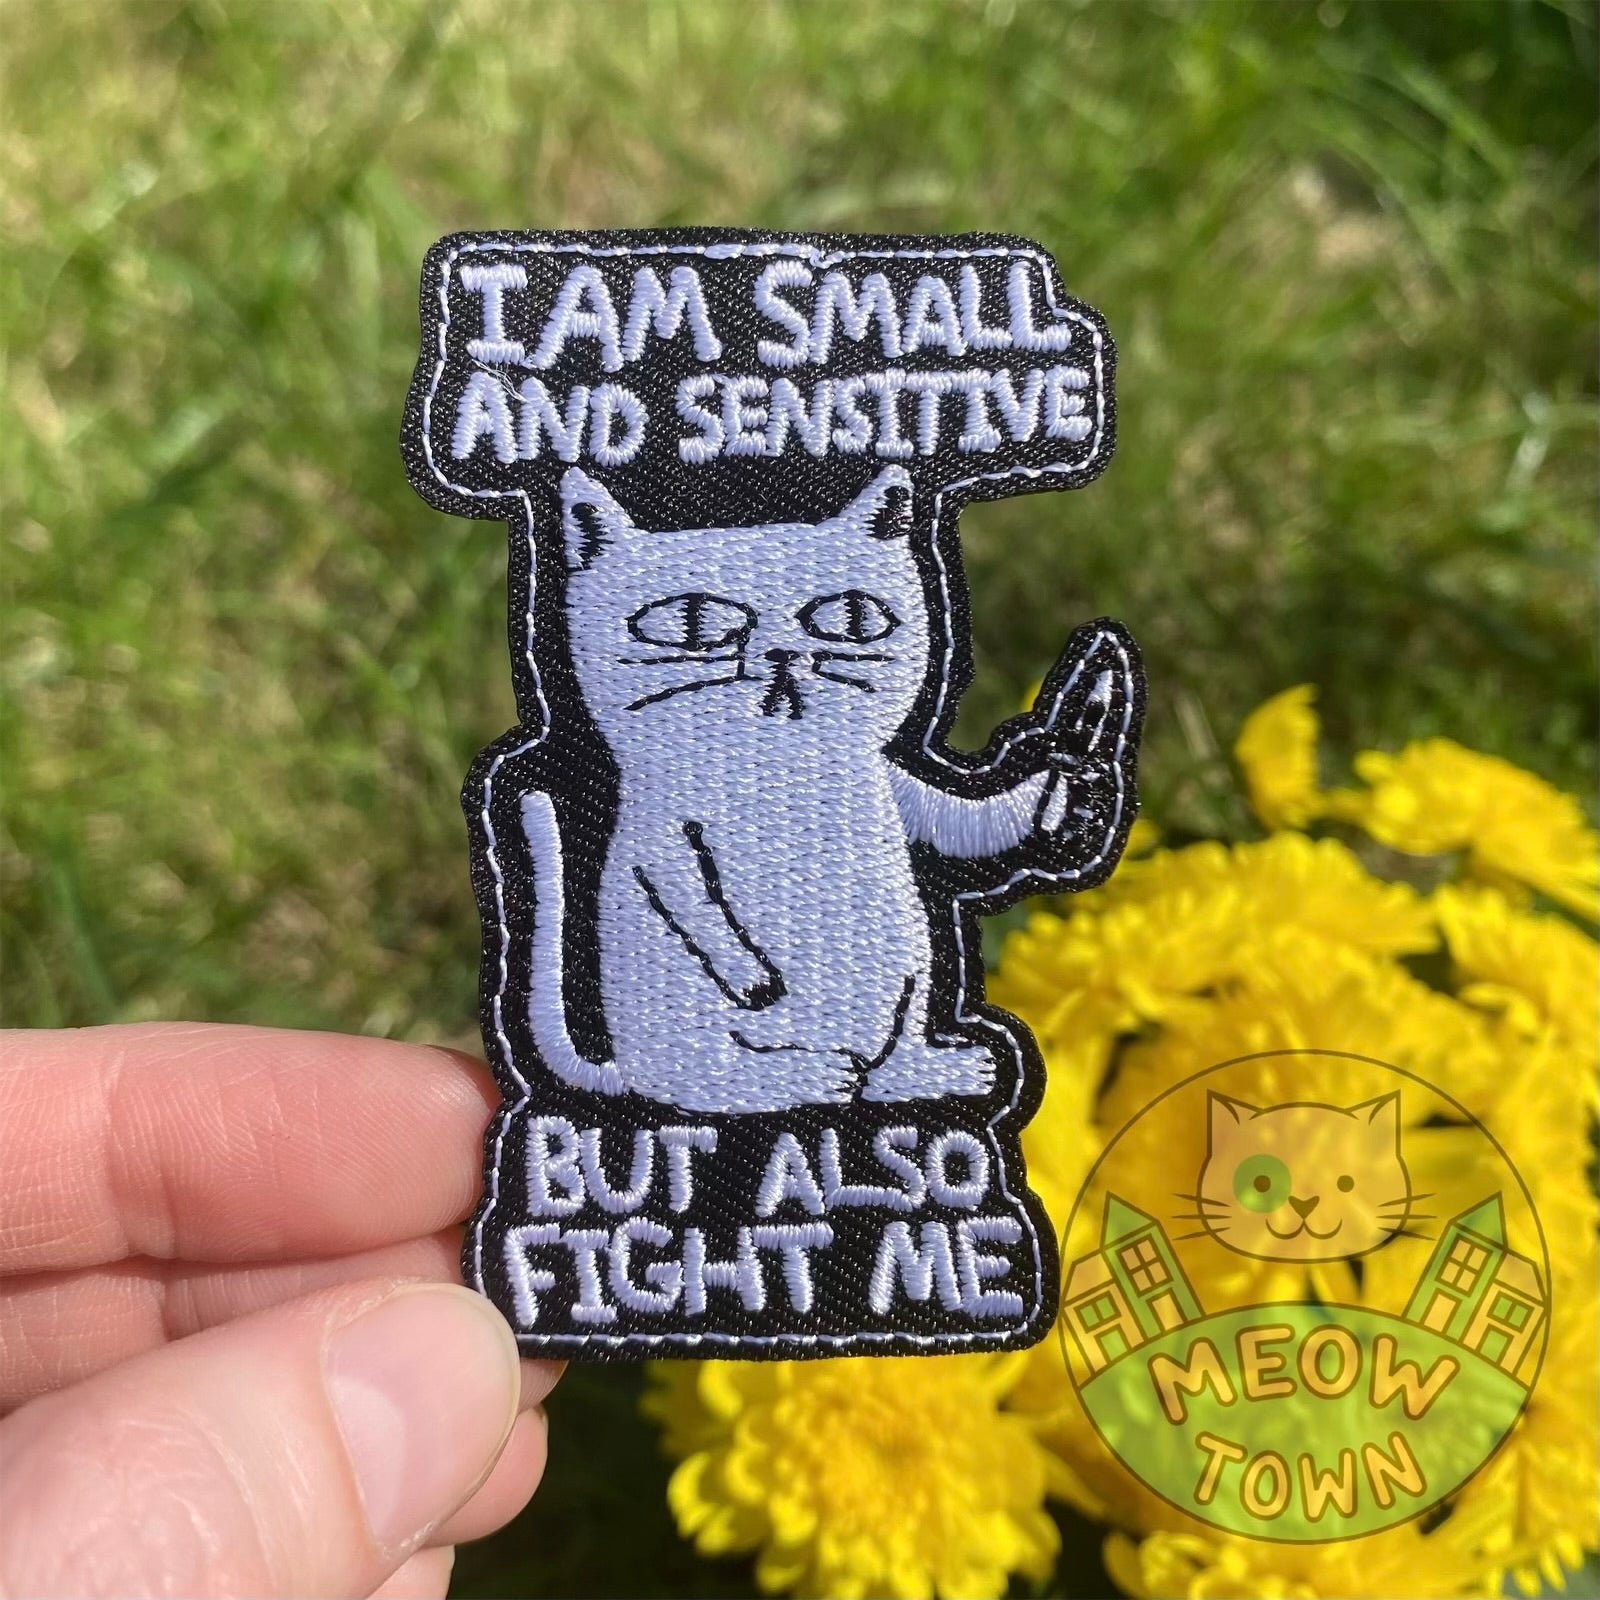 Cute embroidered iron-on cat patch with funny ‘I am small and sensitive but also fight me’ slogan. A perfect way to bring new life to your old garments or to cover small holes or marks with this cute patch!